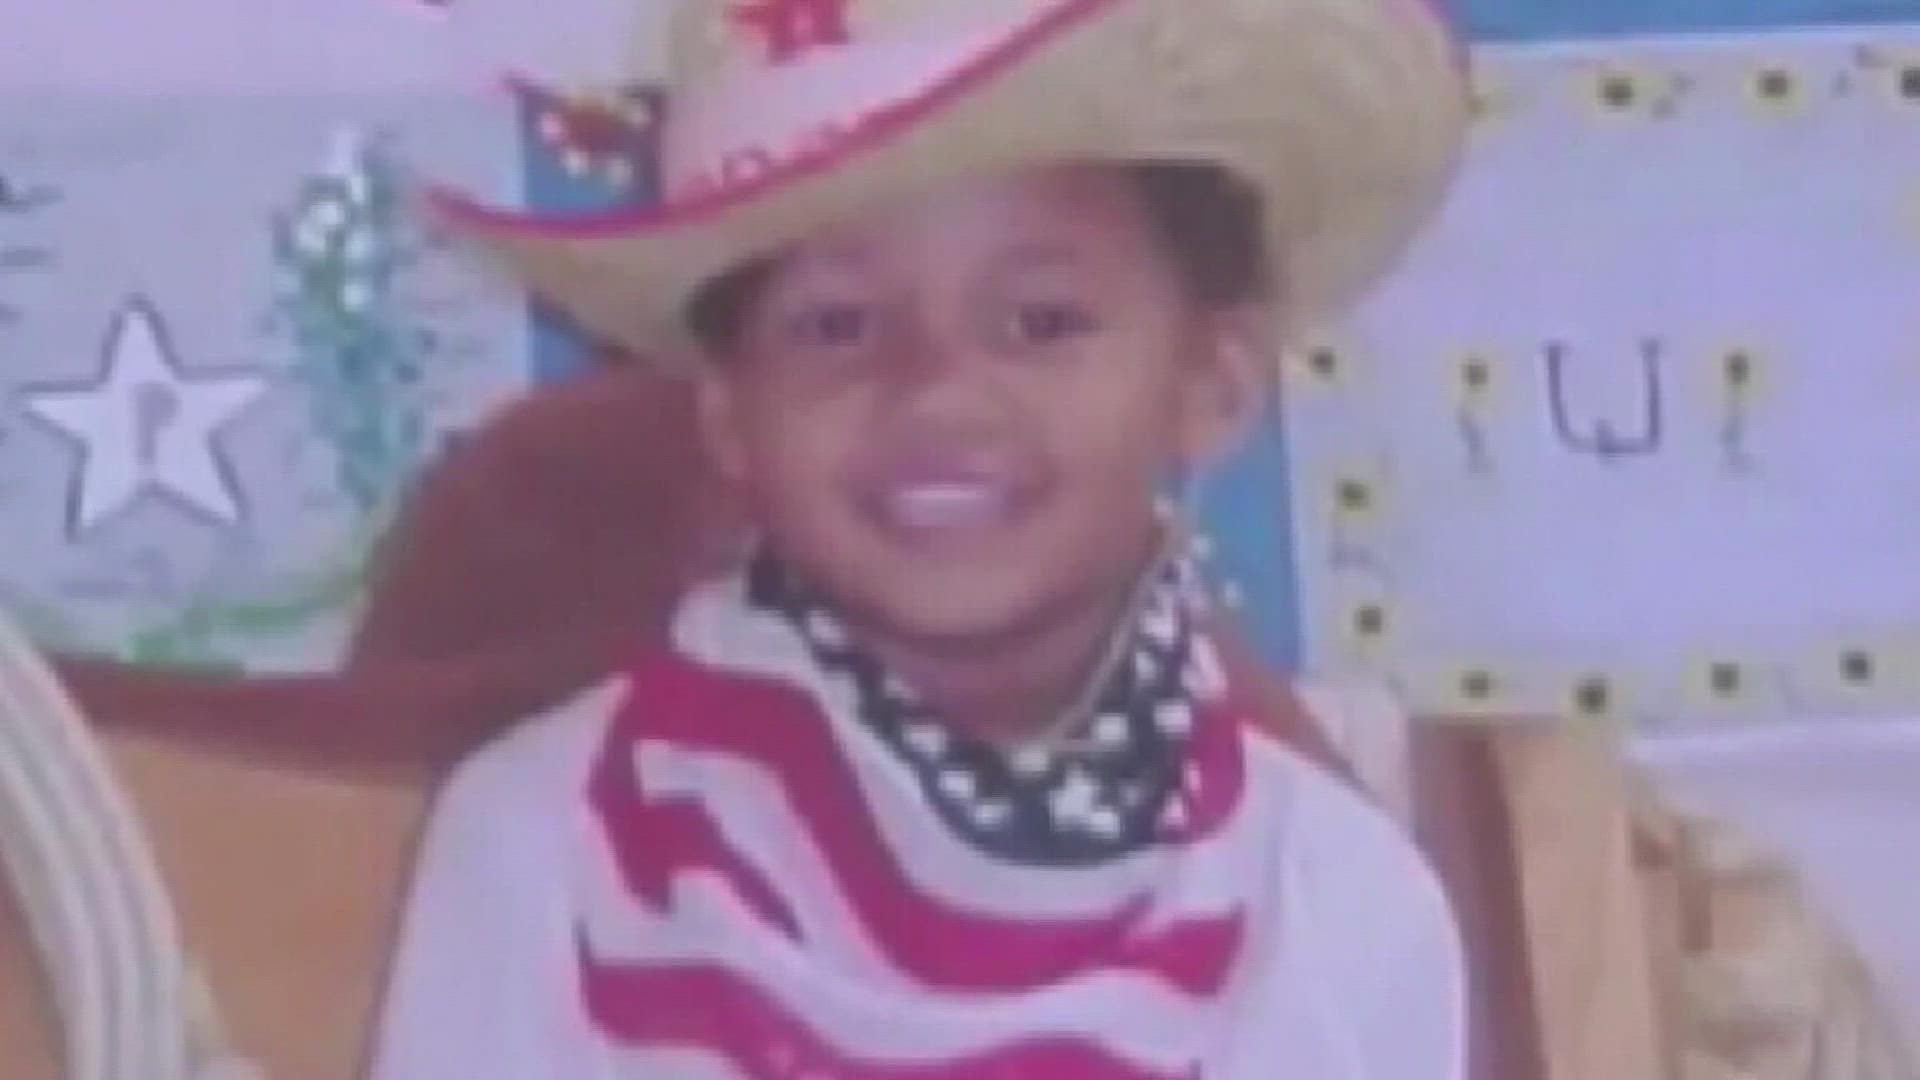 Dannariah Finley was 4-years-old when she was disappeared from her home Orange home.